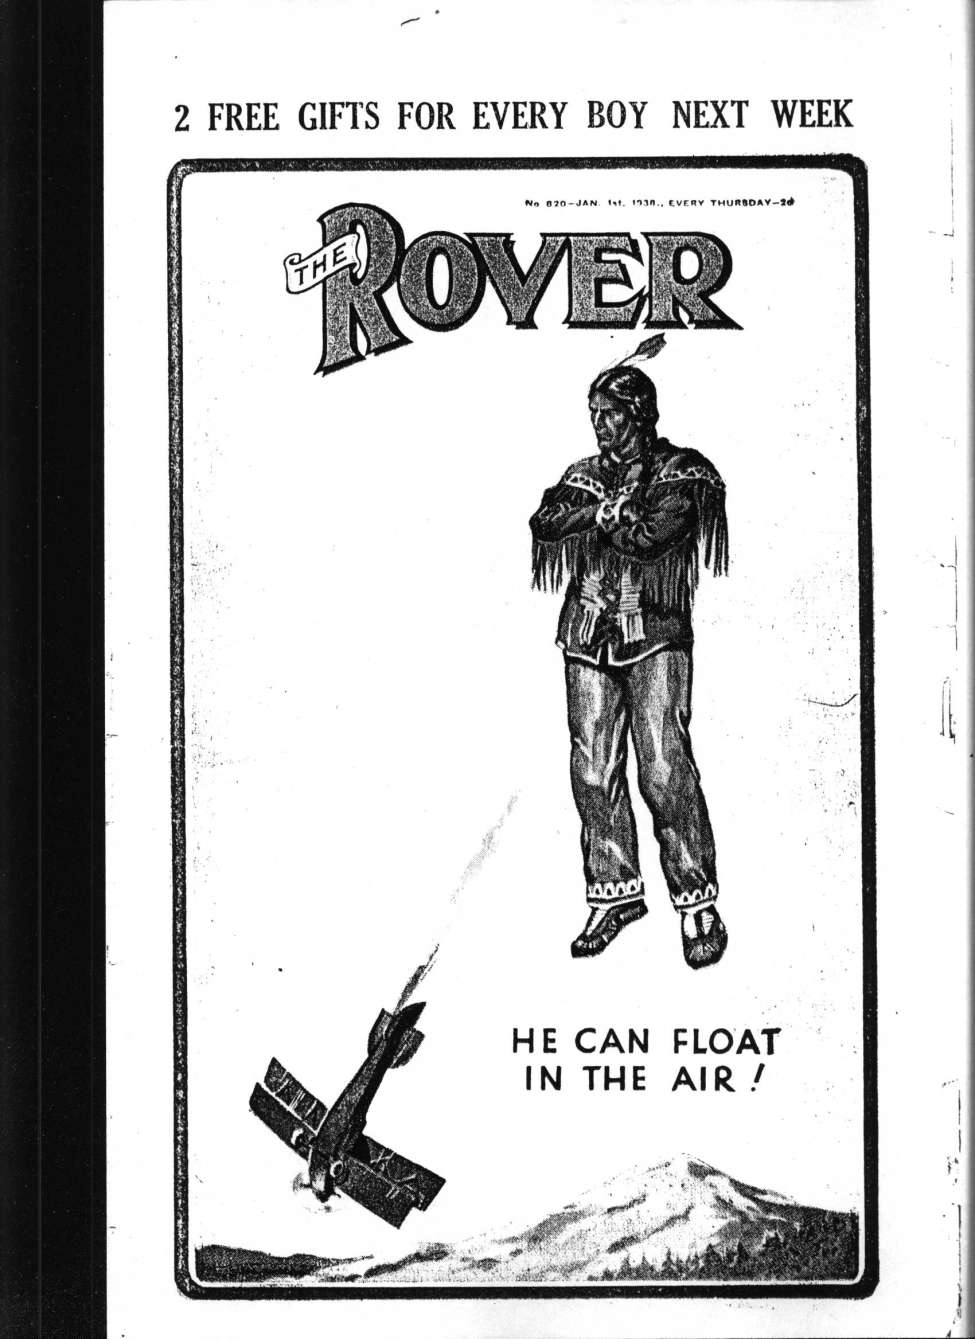 Book Cover For The Rover 820